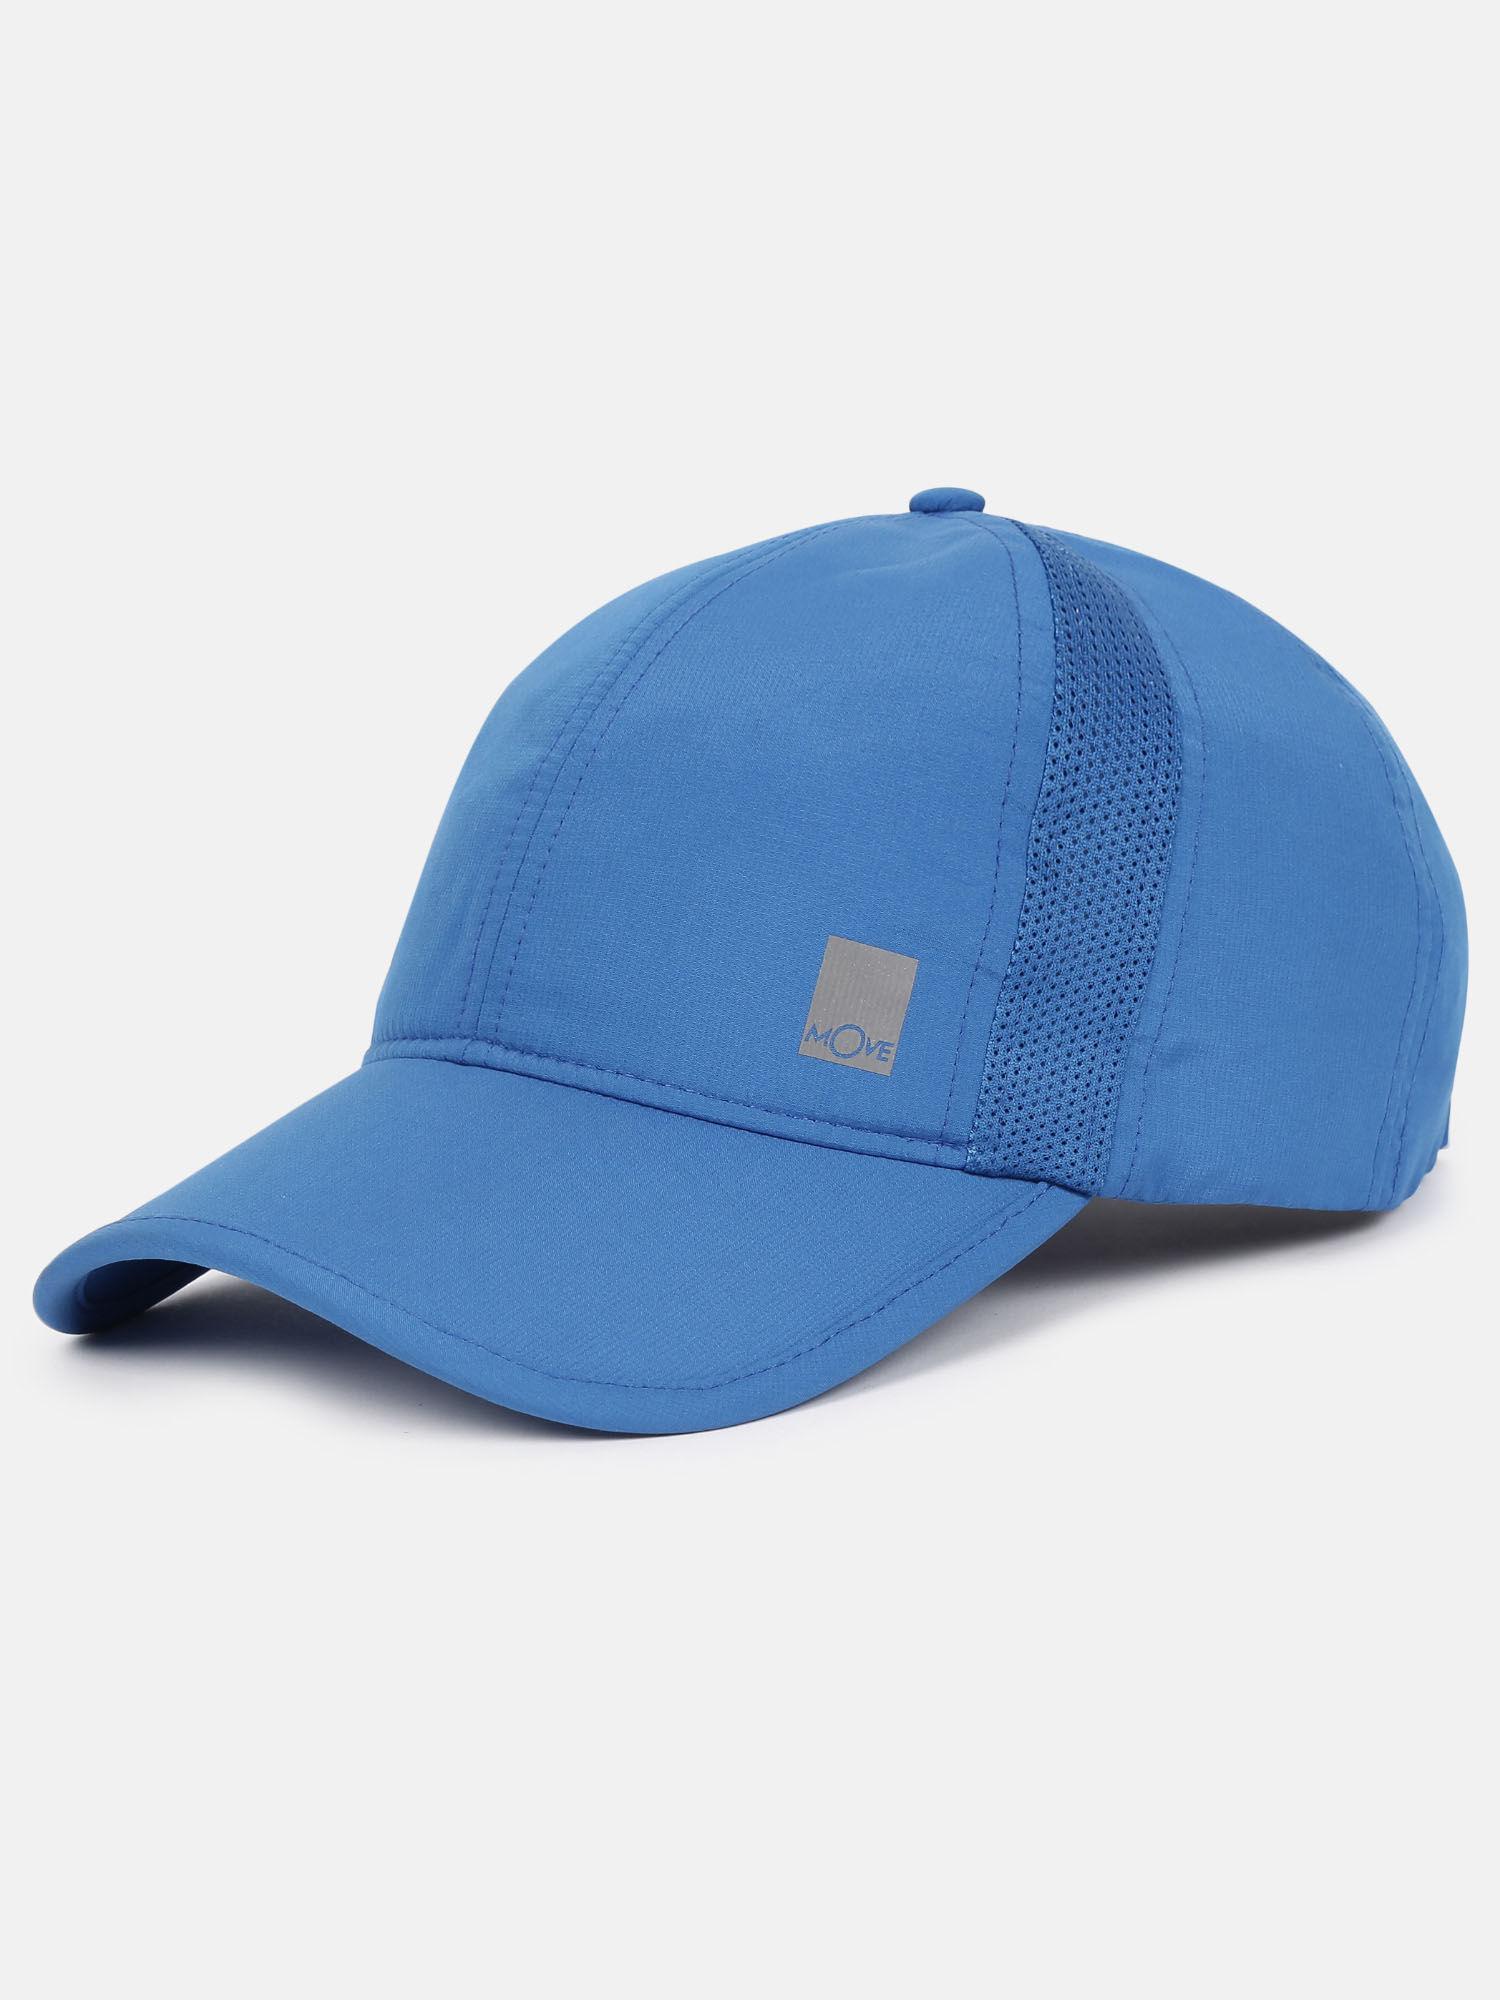 cp21 polyester solid cap with adjustable back closure and stay dry move blue